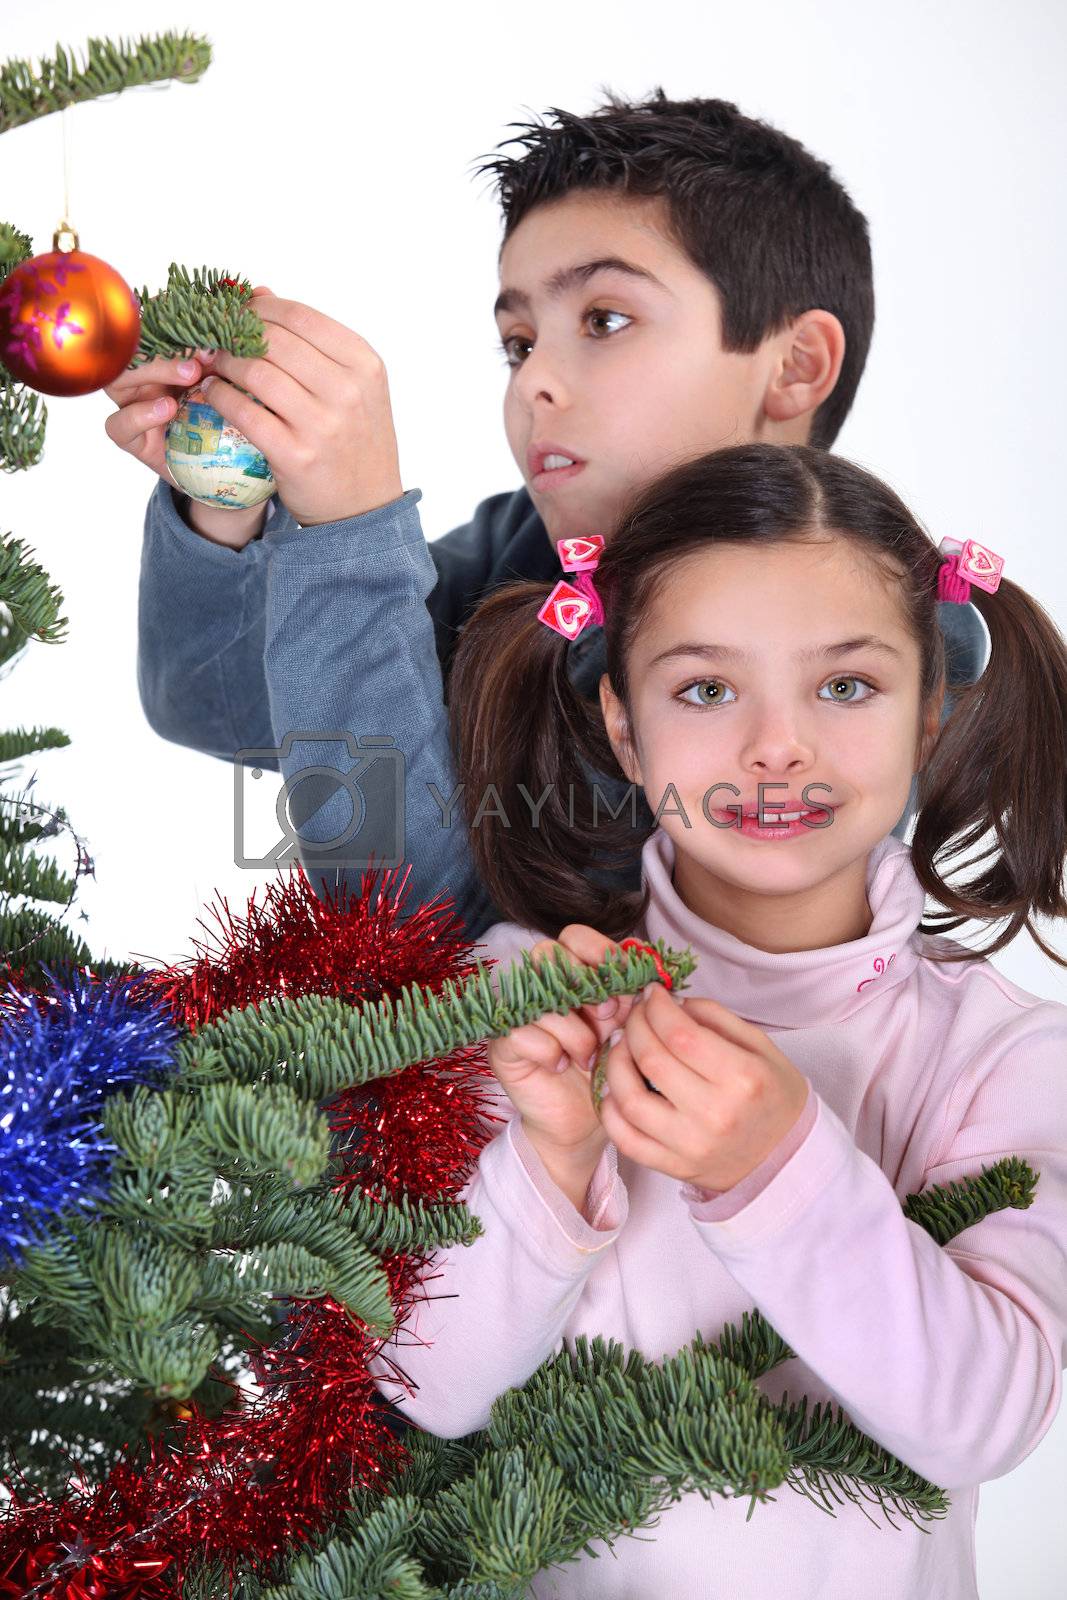 Royalty free image of children decorating Christmas tree by phovoir